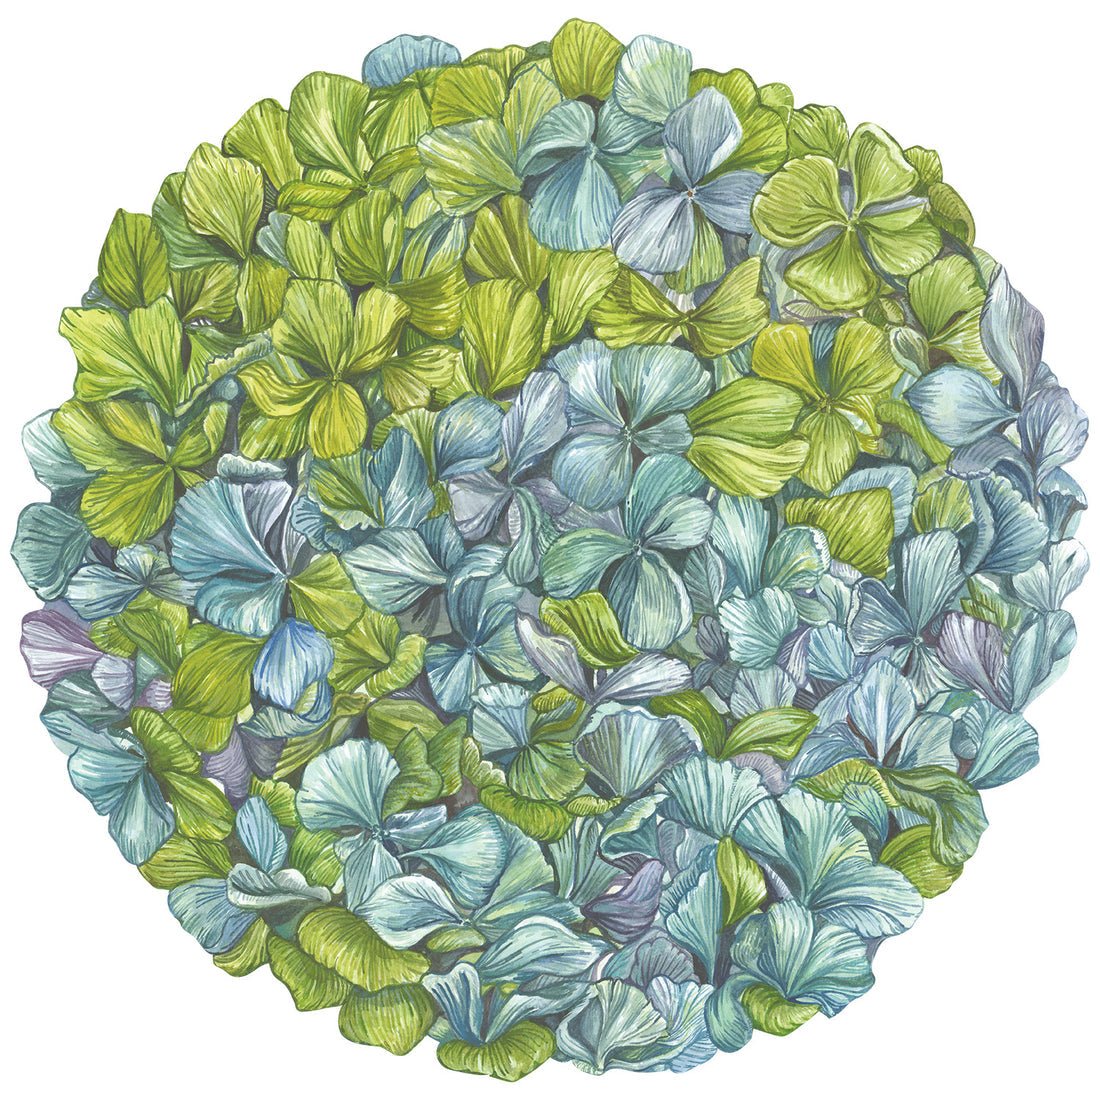 Die-Cut Hydrangea Placemat - Gaines Jewelers